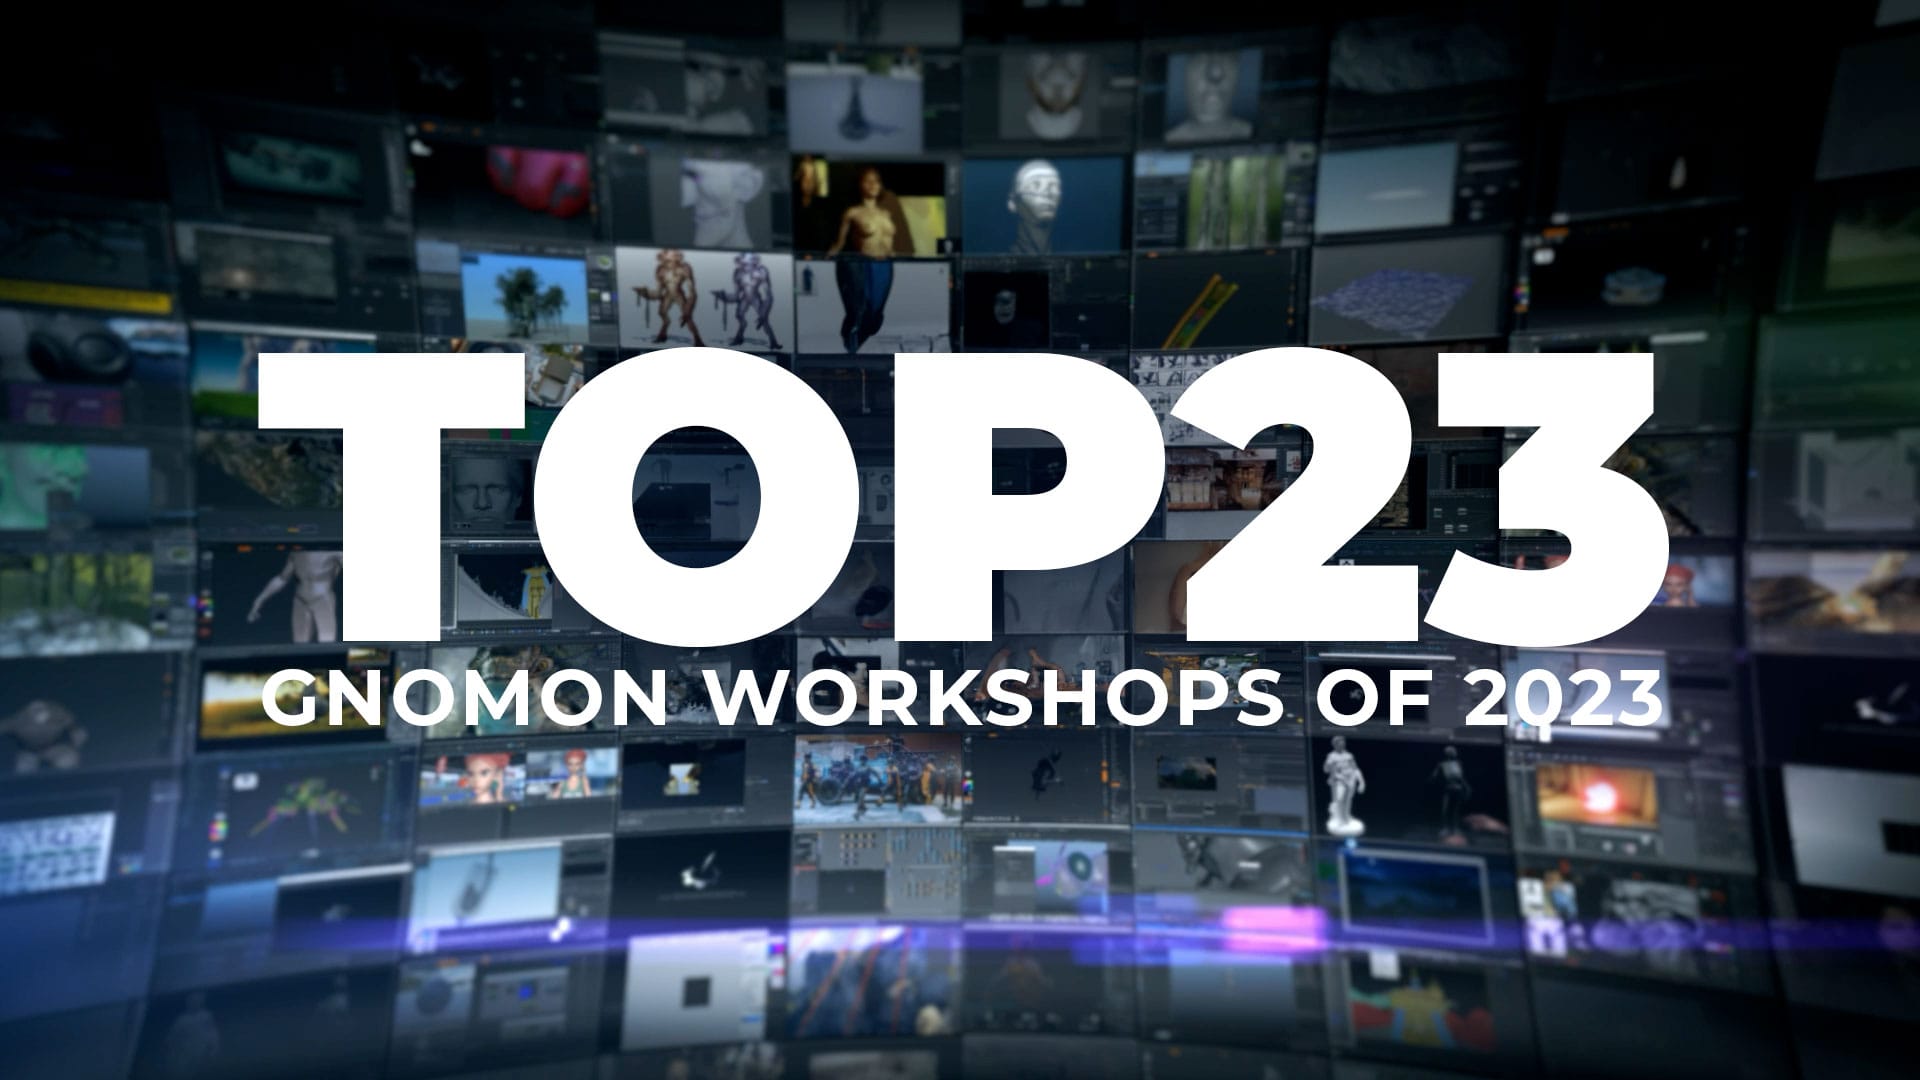 The Top 23 Gnomon Workshops of 2023 Revealed